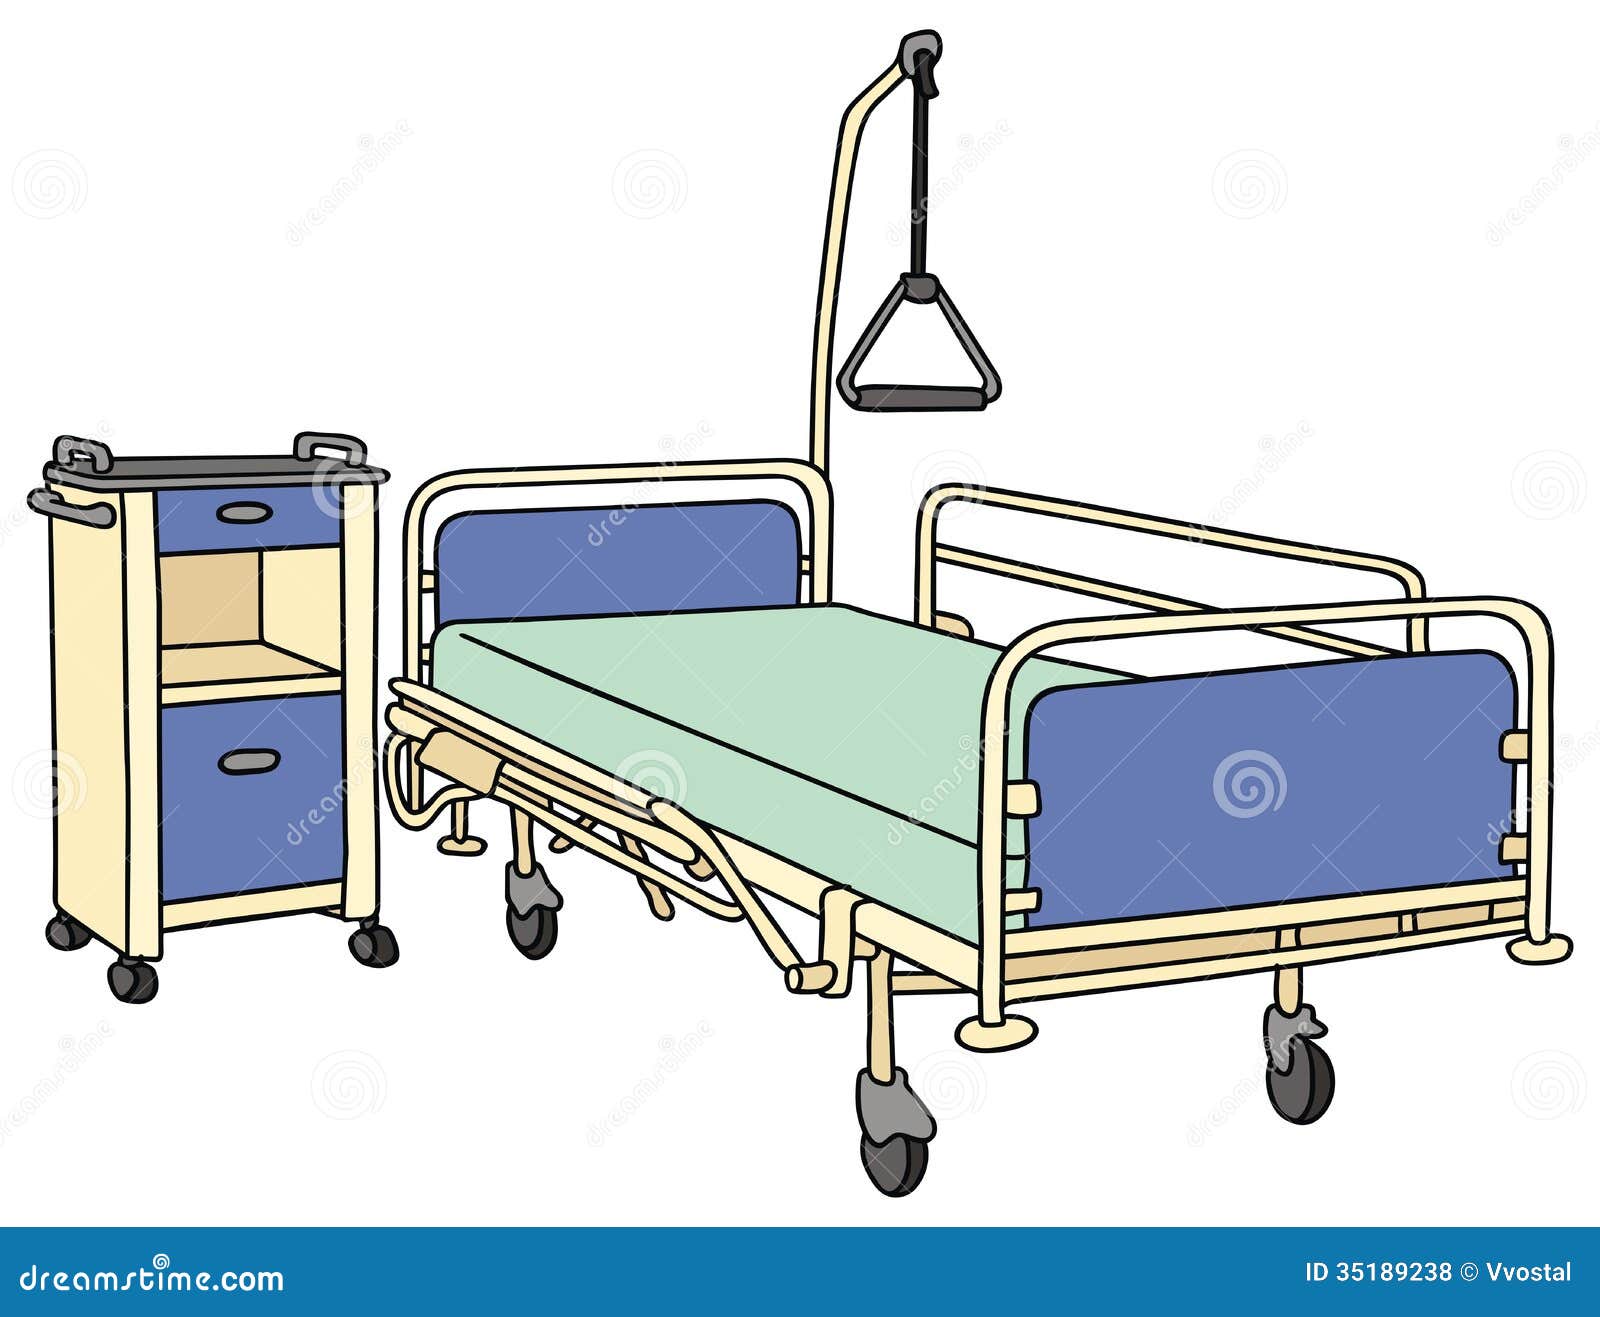 Hand drawing of a hospital bed.